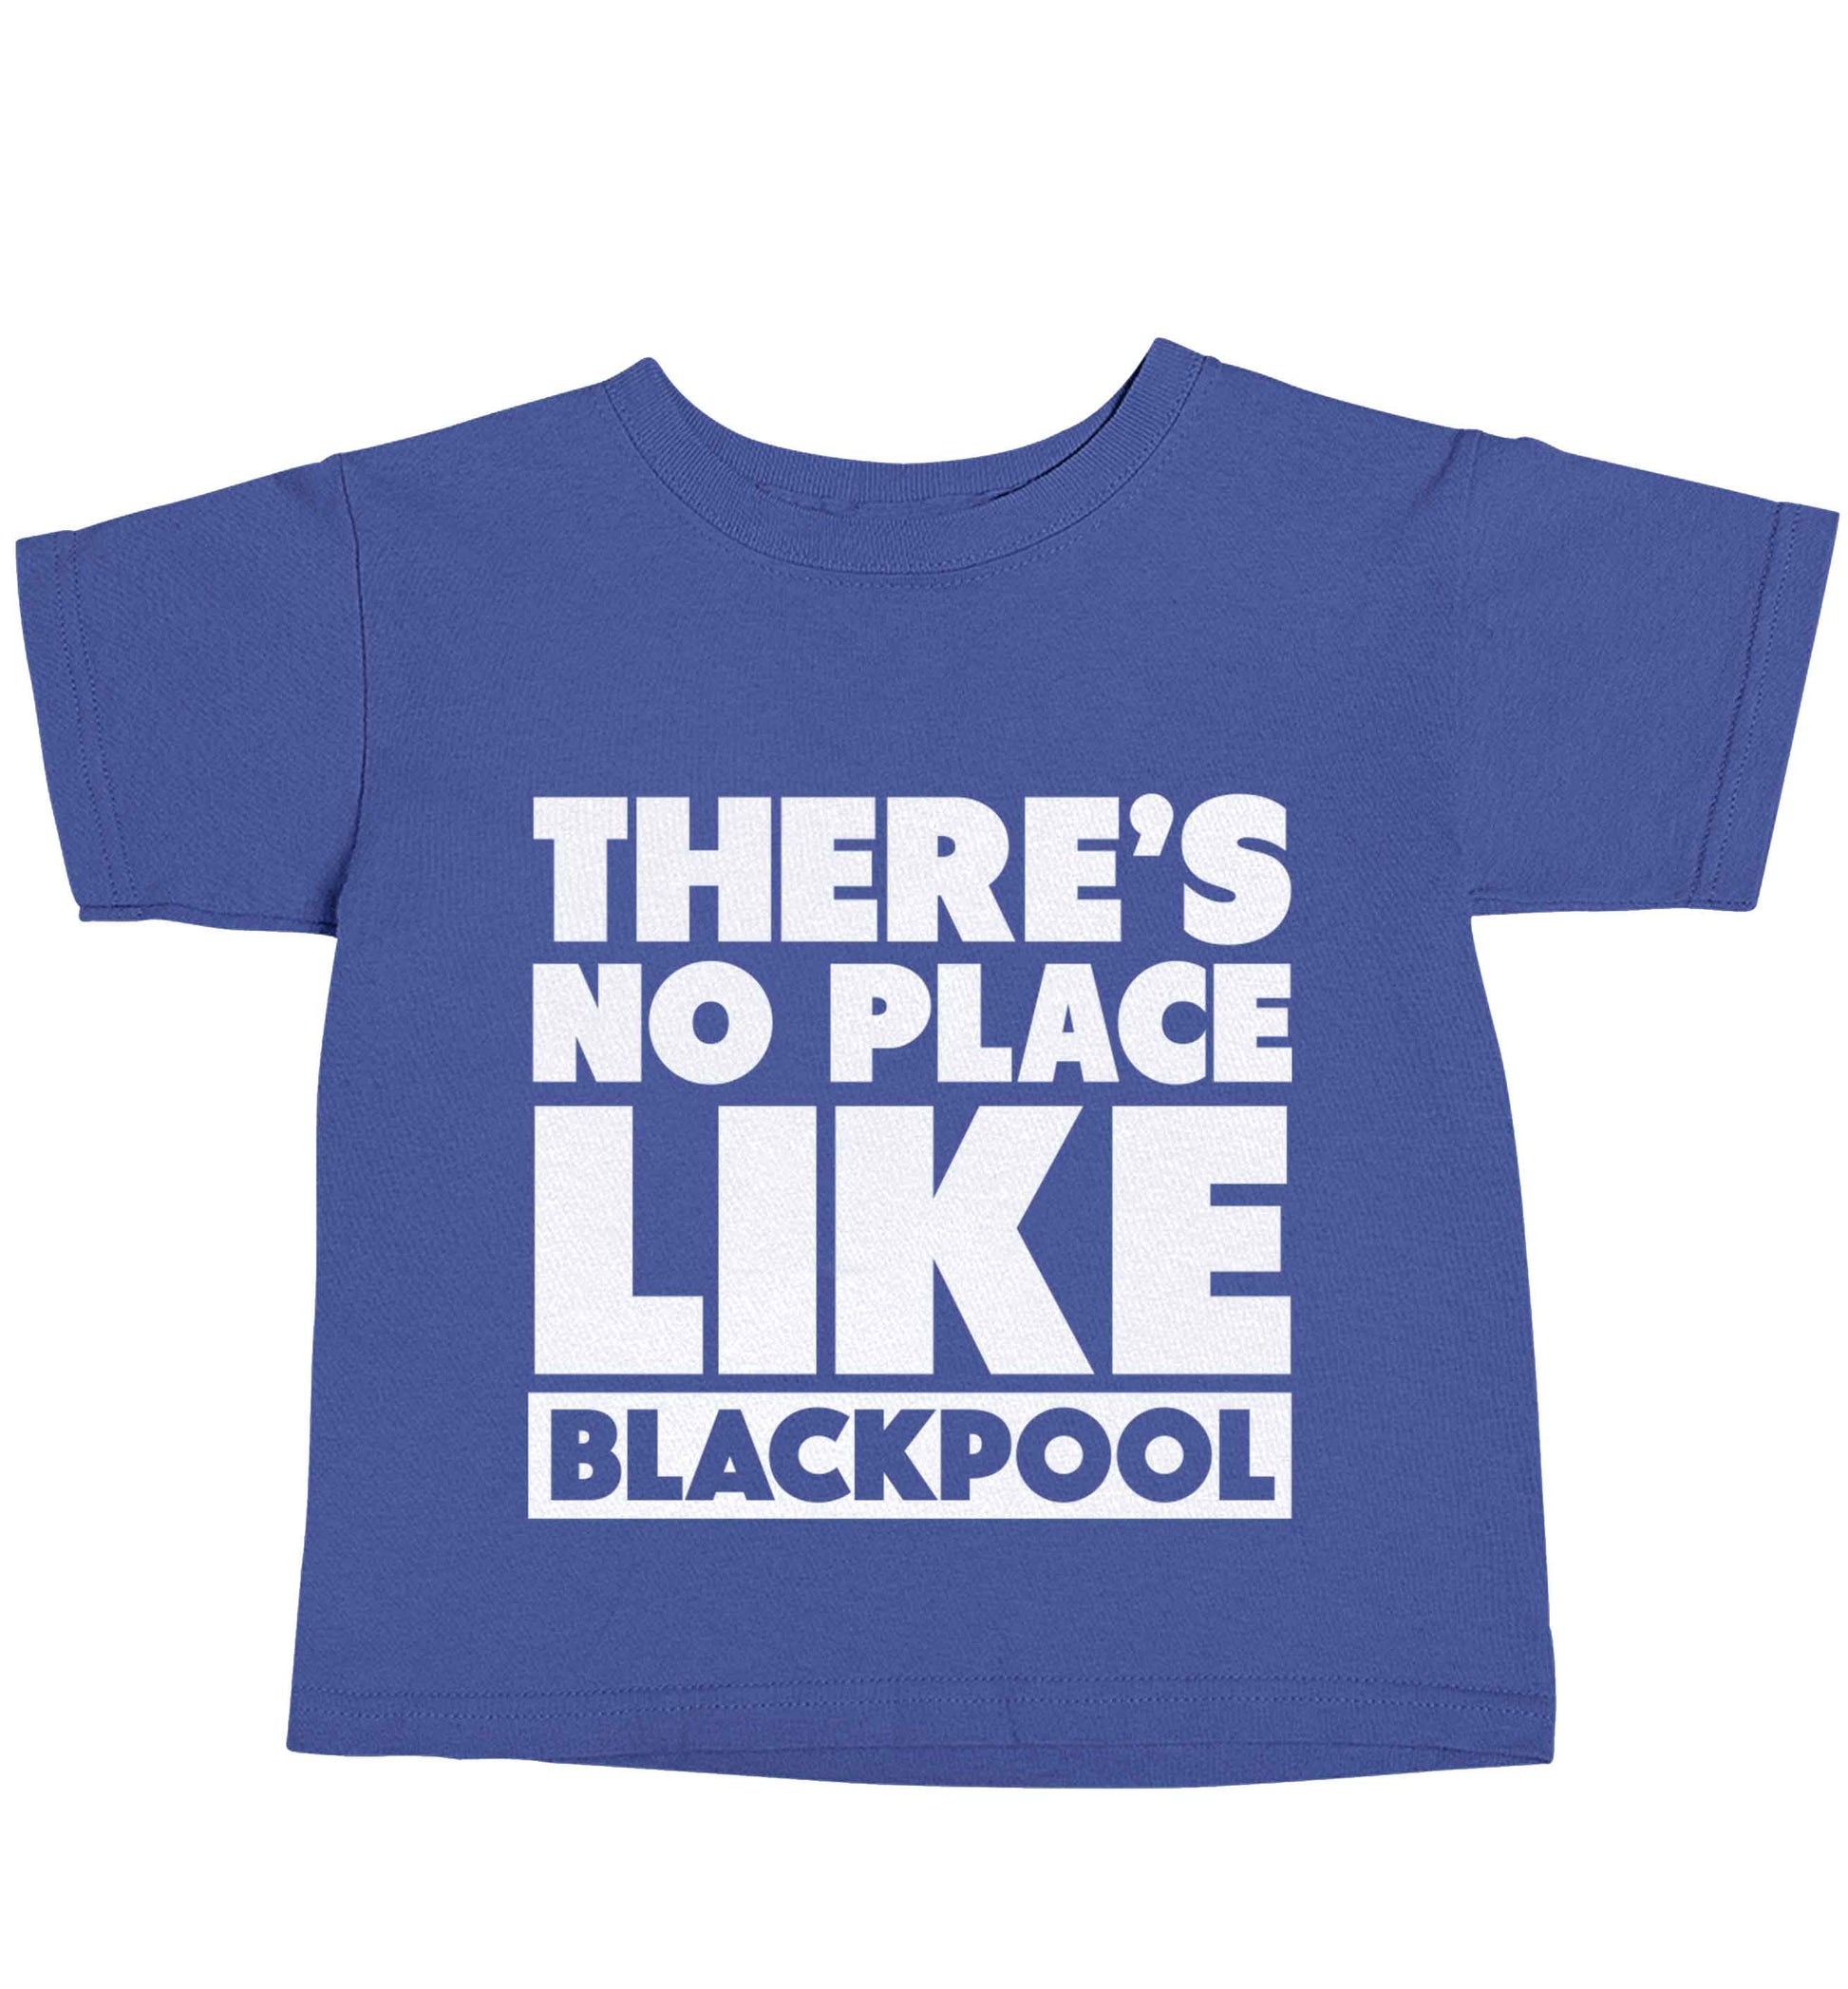 There's no place like Blackpool blue baby toddler Tshirt 2 Years